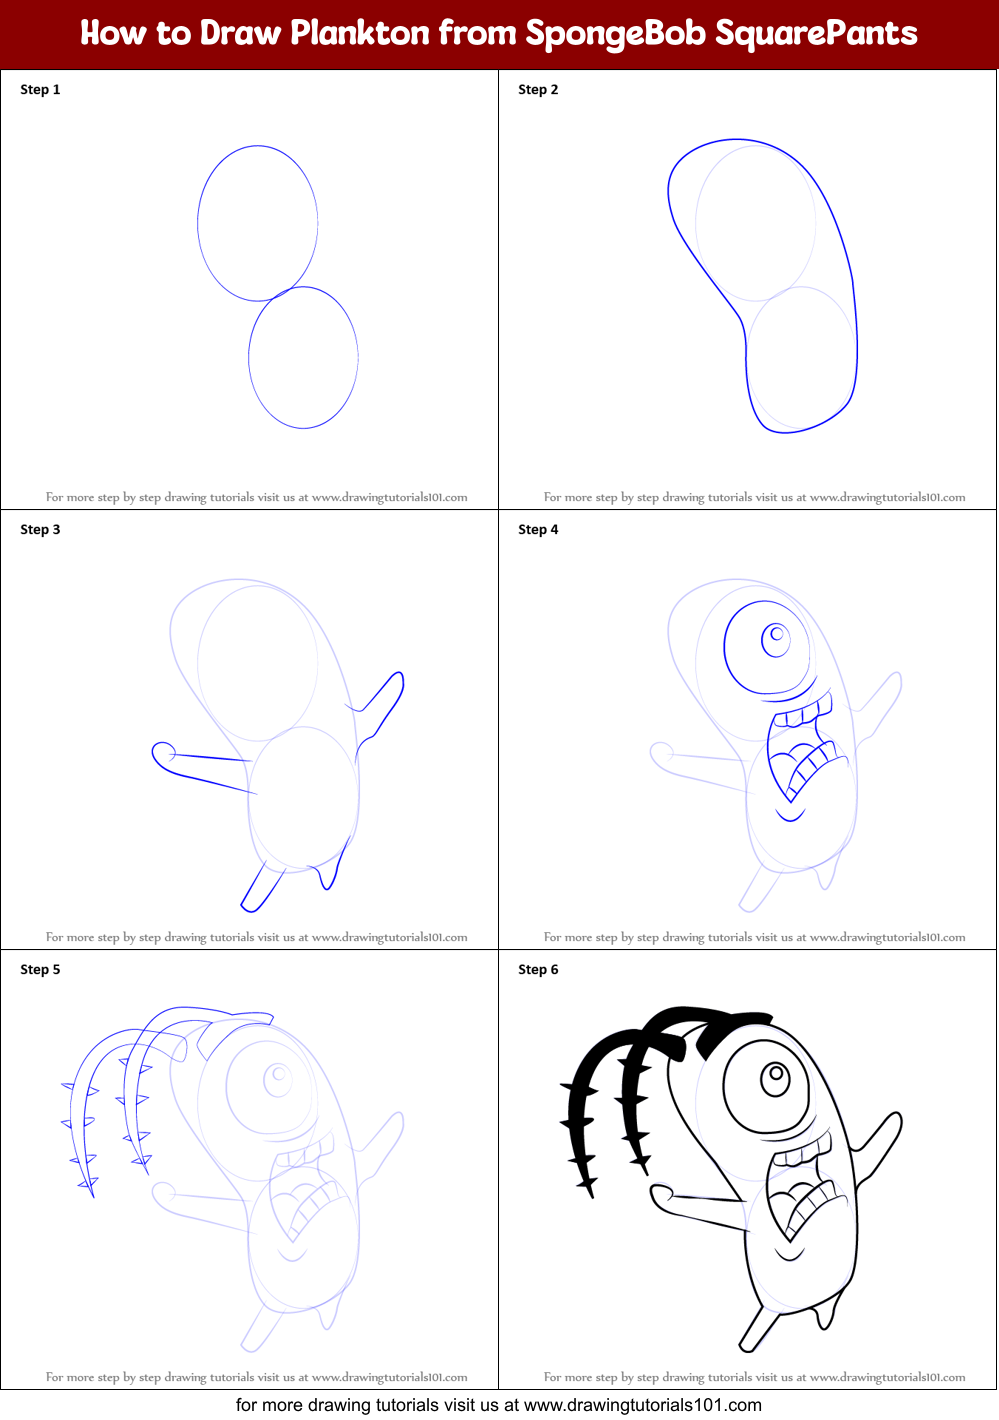 How To Draw Plankton From Spongebob Squarepants Printable Step By